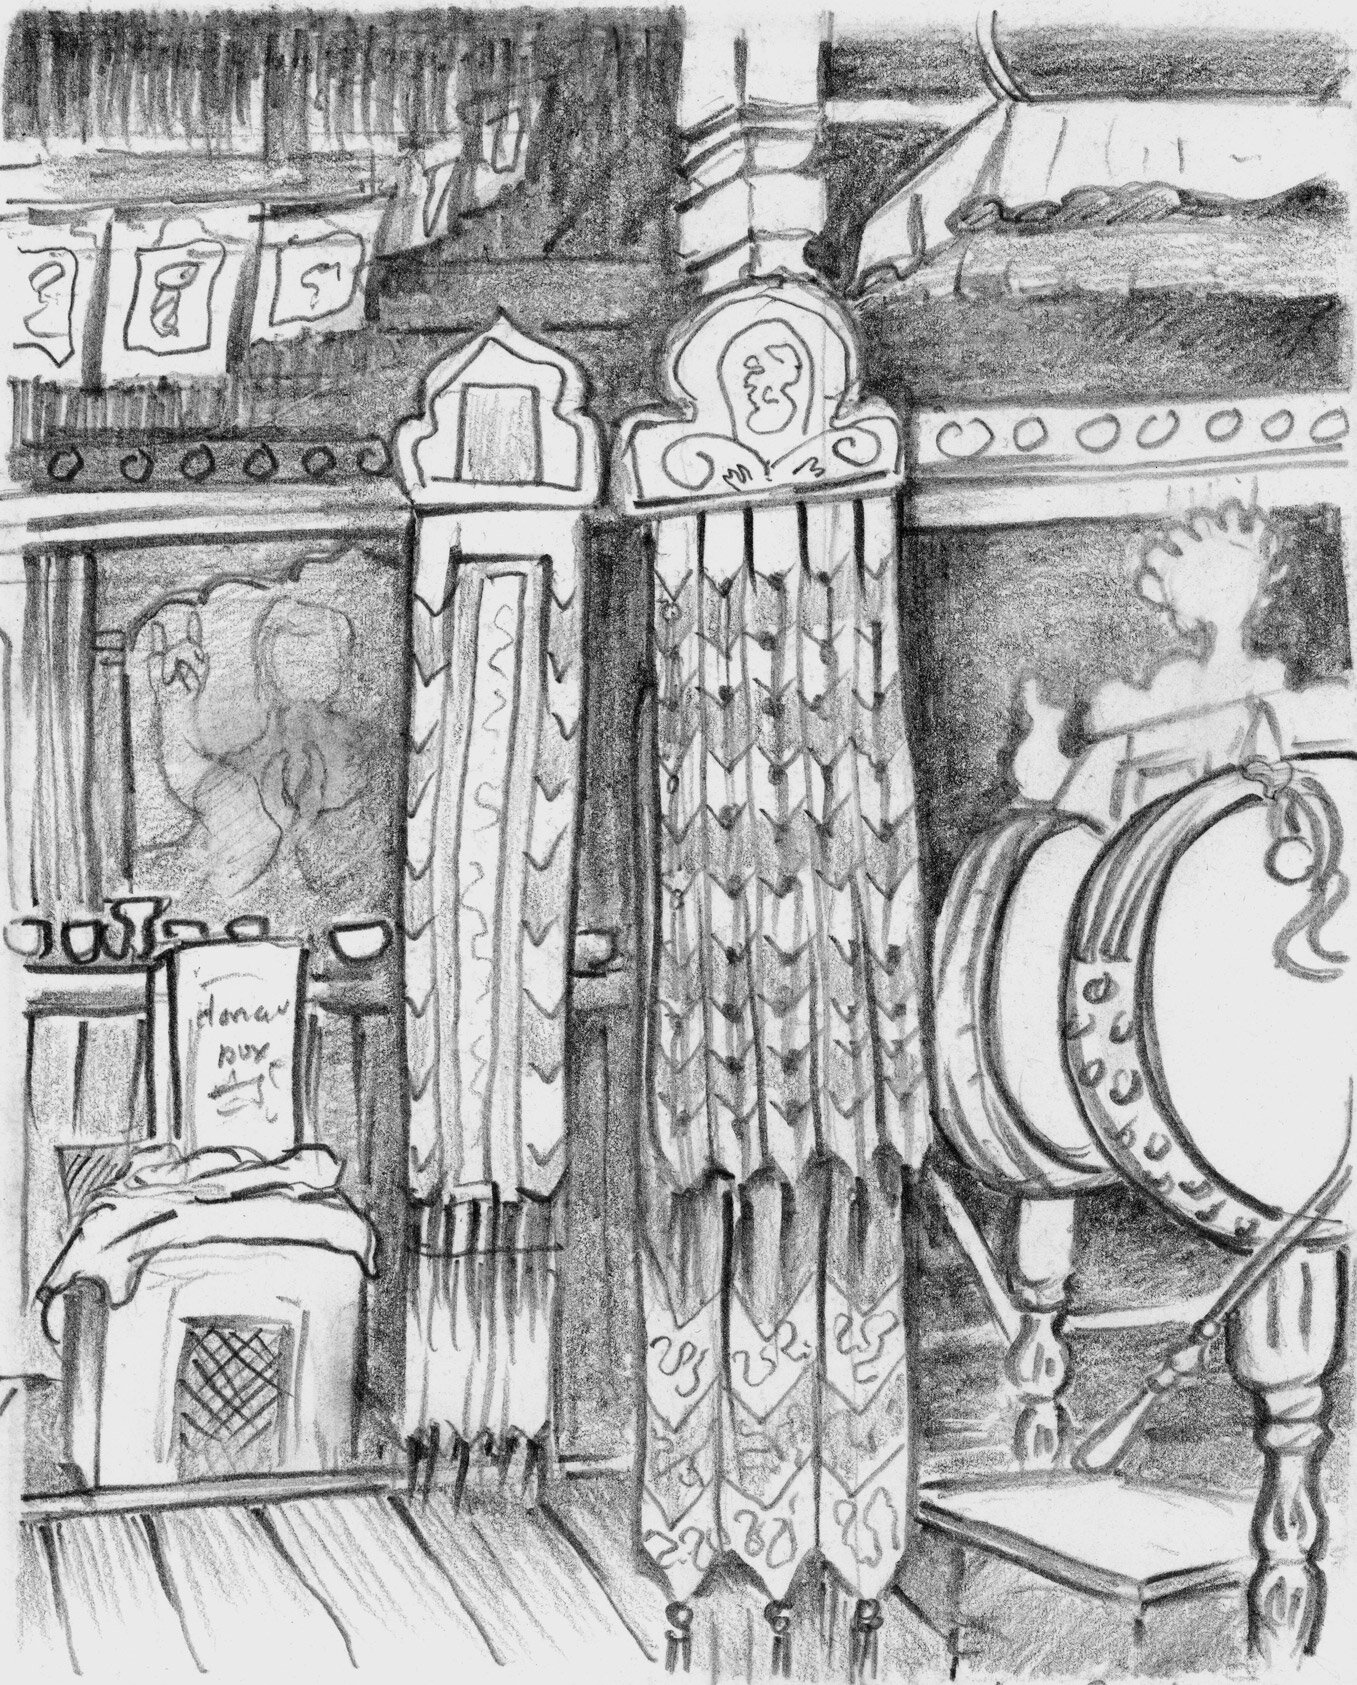   Mulktinath Nepal Fire and Water Temple  2010 Pencil on paper 5.25x4.25 inches 